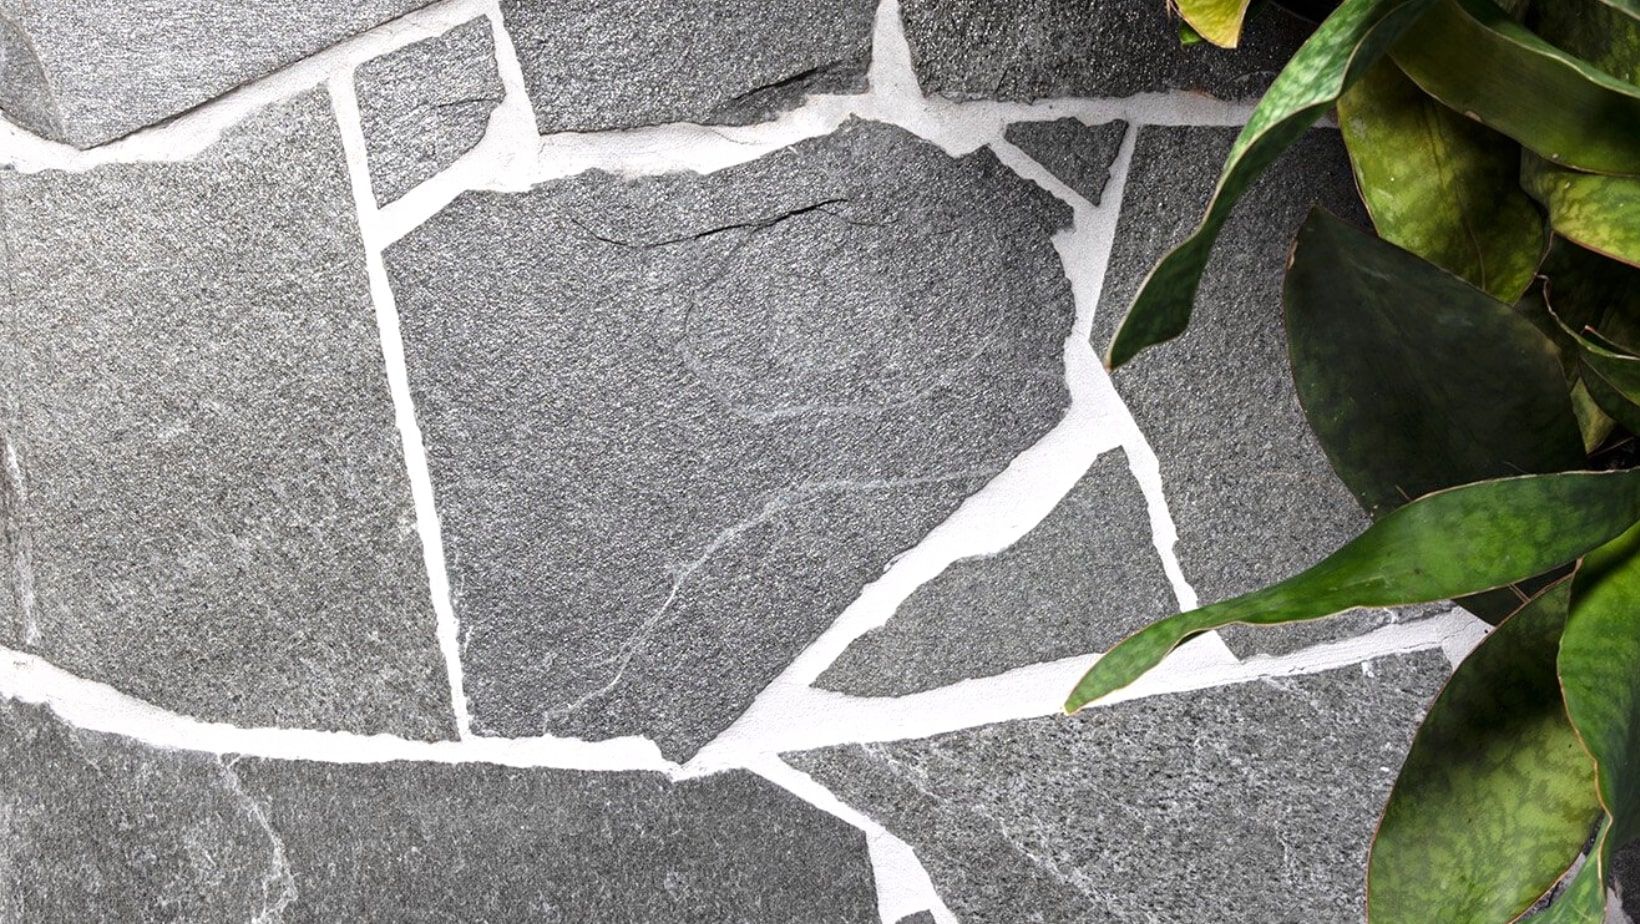 Crazy paving with natural stone and plants